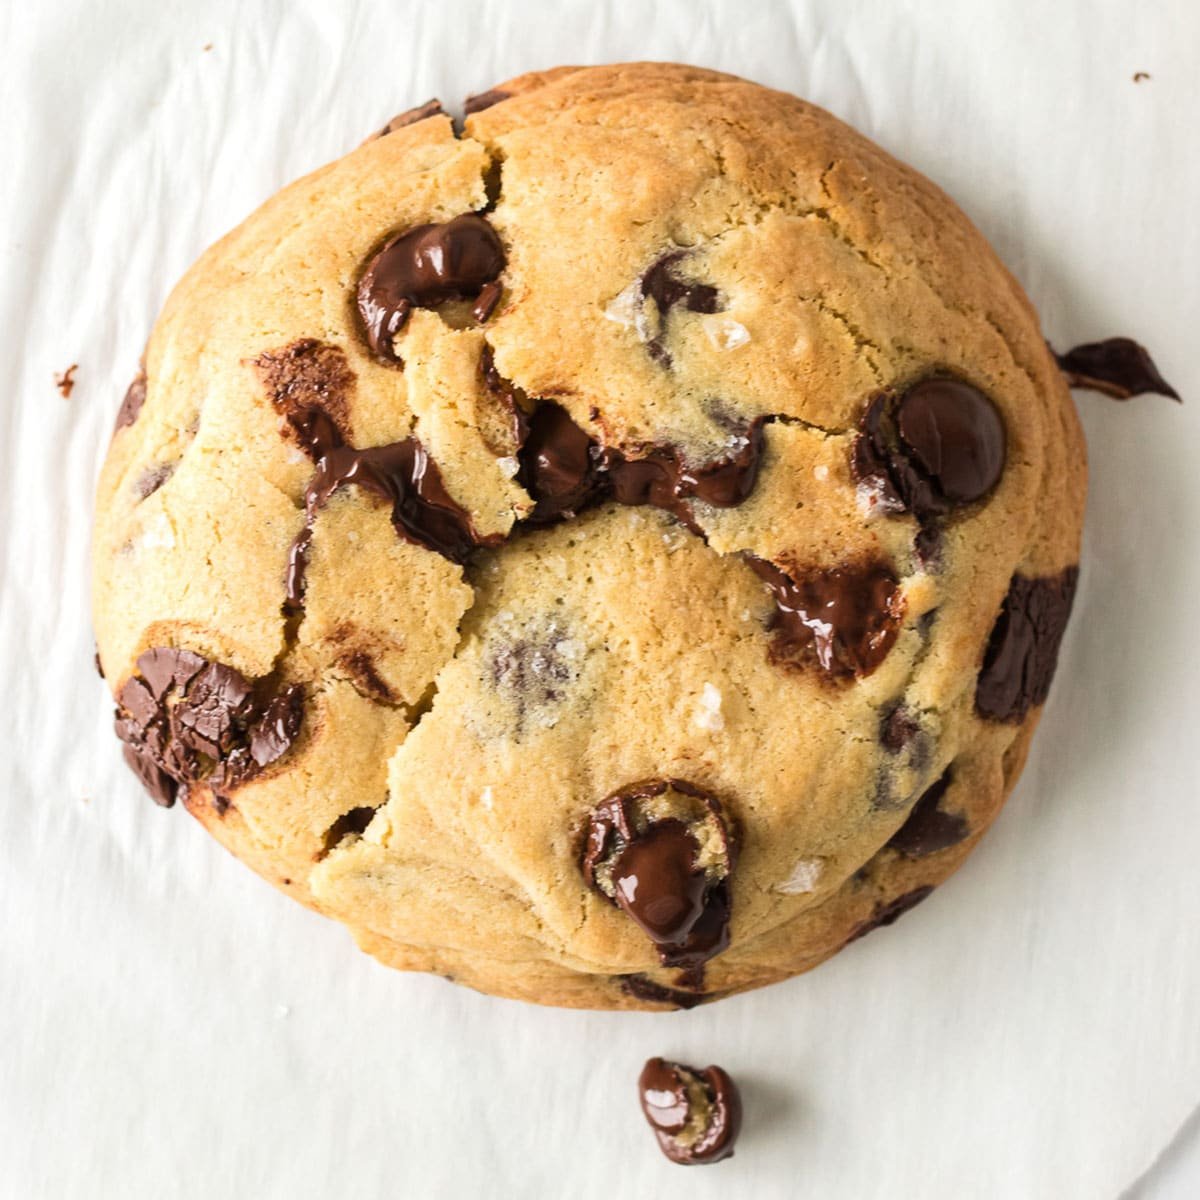 https://www.persnicketyplates.com/wp-content/uploads/2012/03/giant-chocolate-chip-cookie-12-SQUARE.jpg